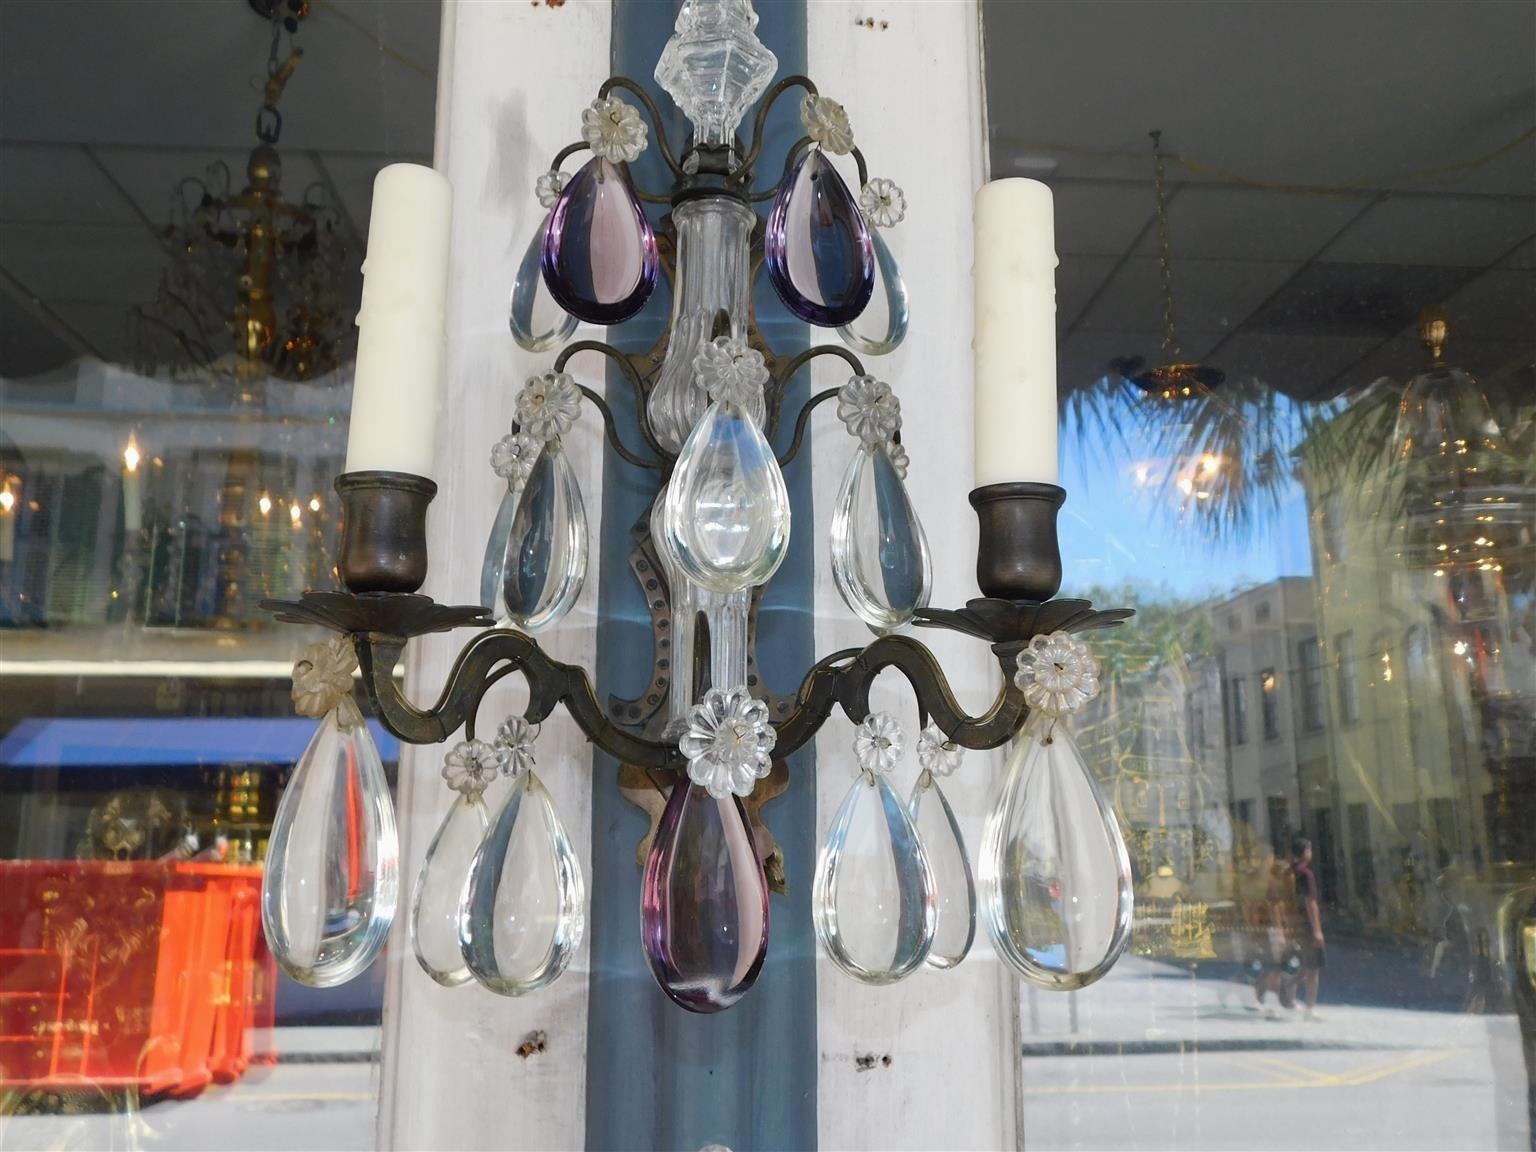 Pair of French Amethyst Crystal and Bronze Sphere Finial Wall Sconces, C. 1820 For Sale 4